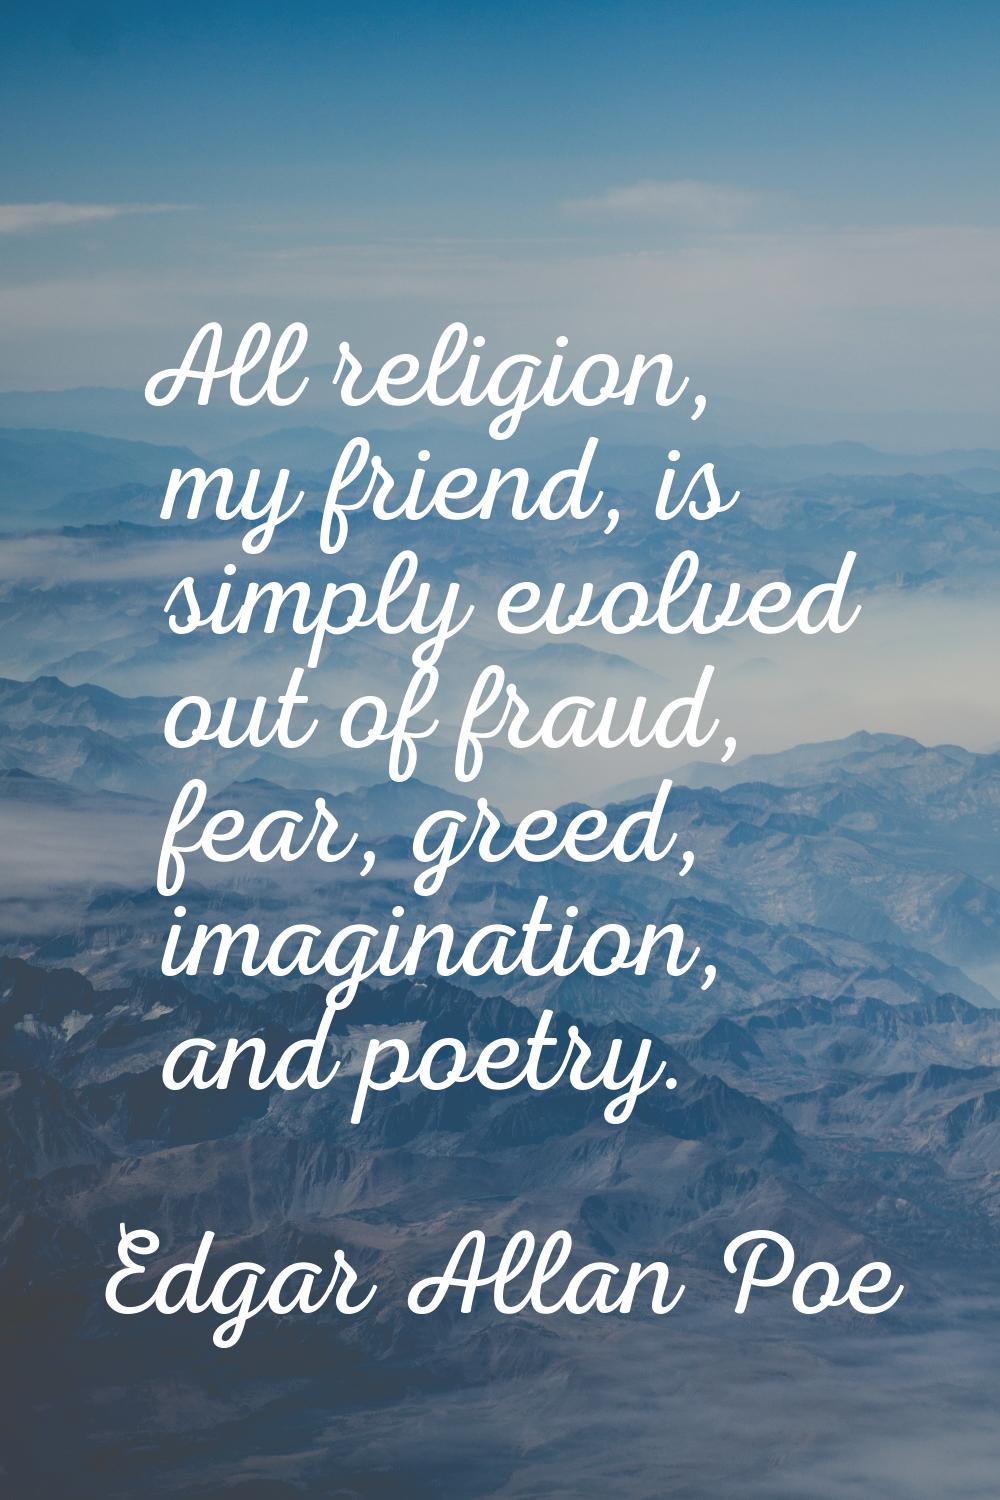 All religion, my friend, is simply evolved out of fraud, fear, greed, imagination, and poetry.